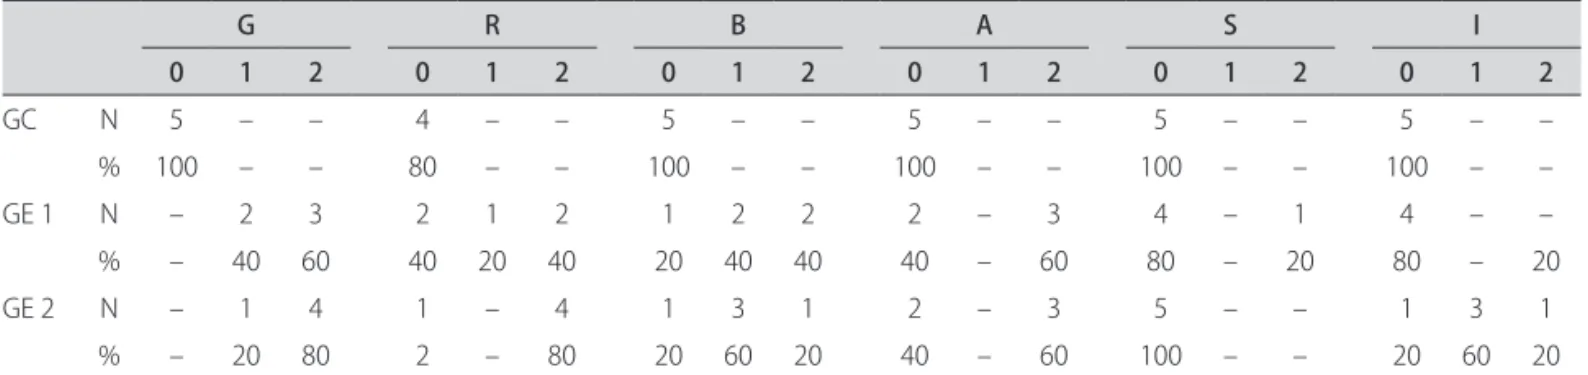 Table 3 sets out the values assigned to the voices of  each group, analyzed in a hearing-perceptual way through  GRBASI scale.